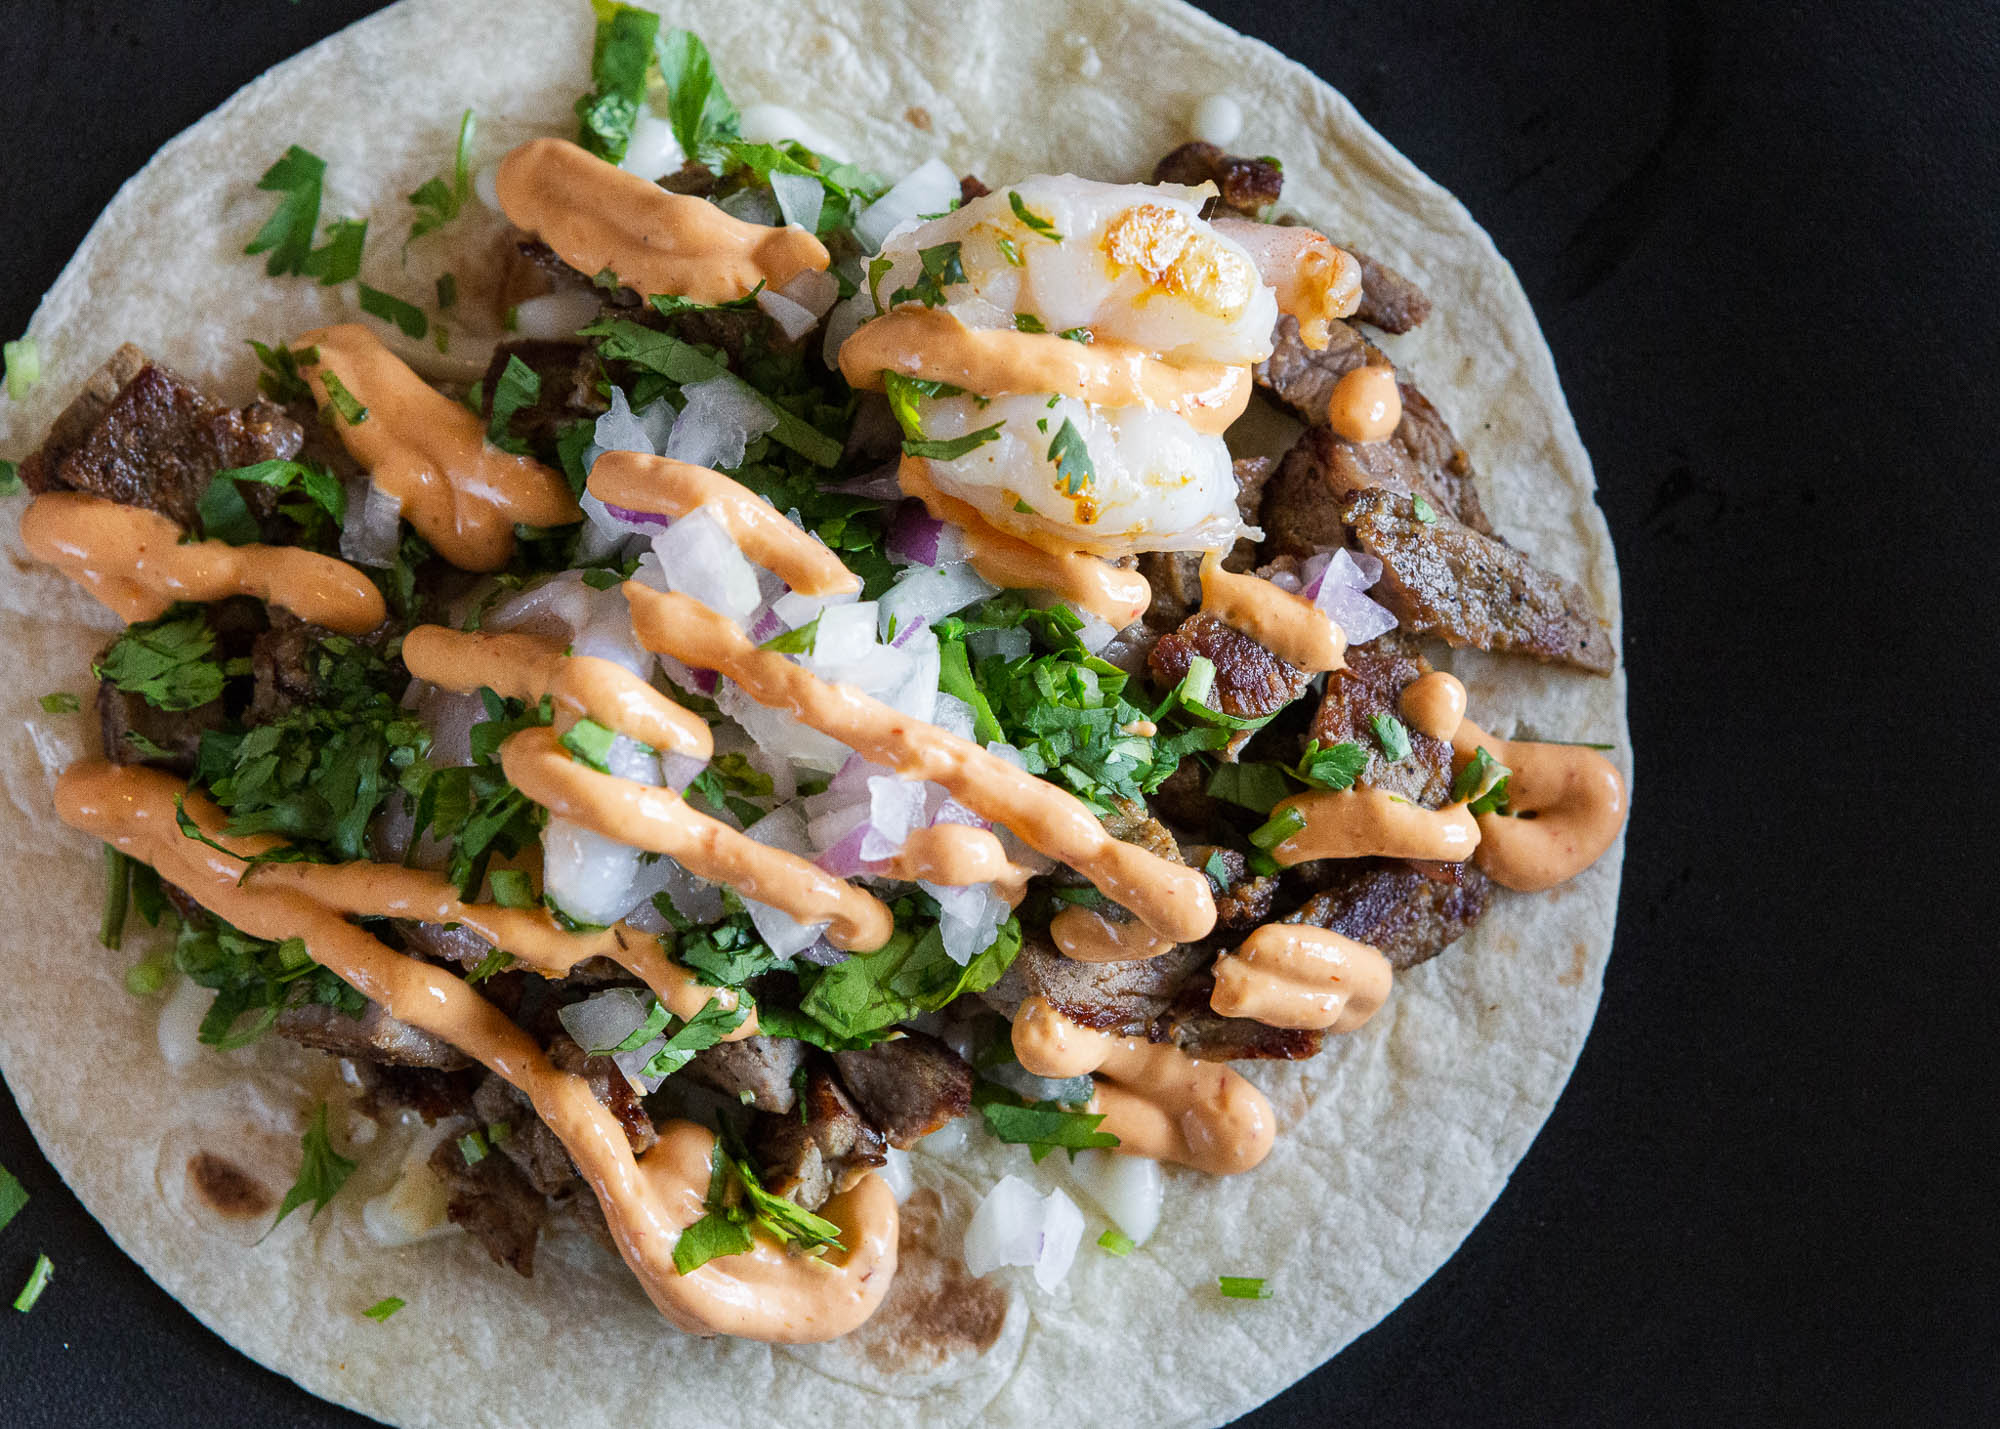 Surf & Turf taco, topped with cheese, onion, cilantro and chipotle crema